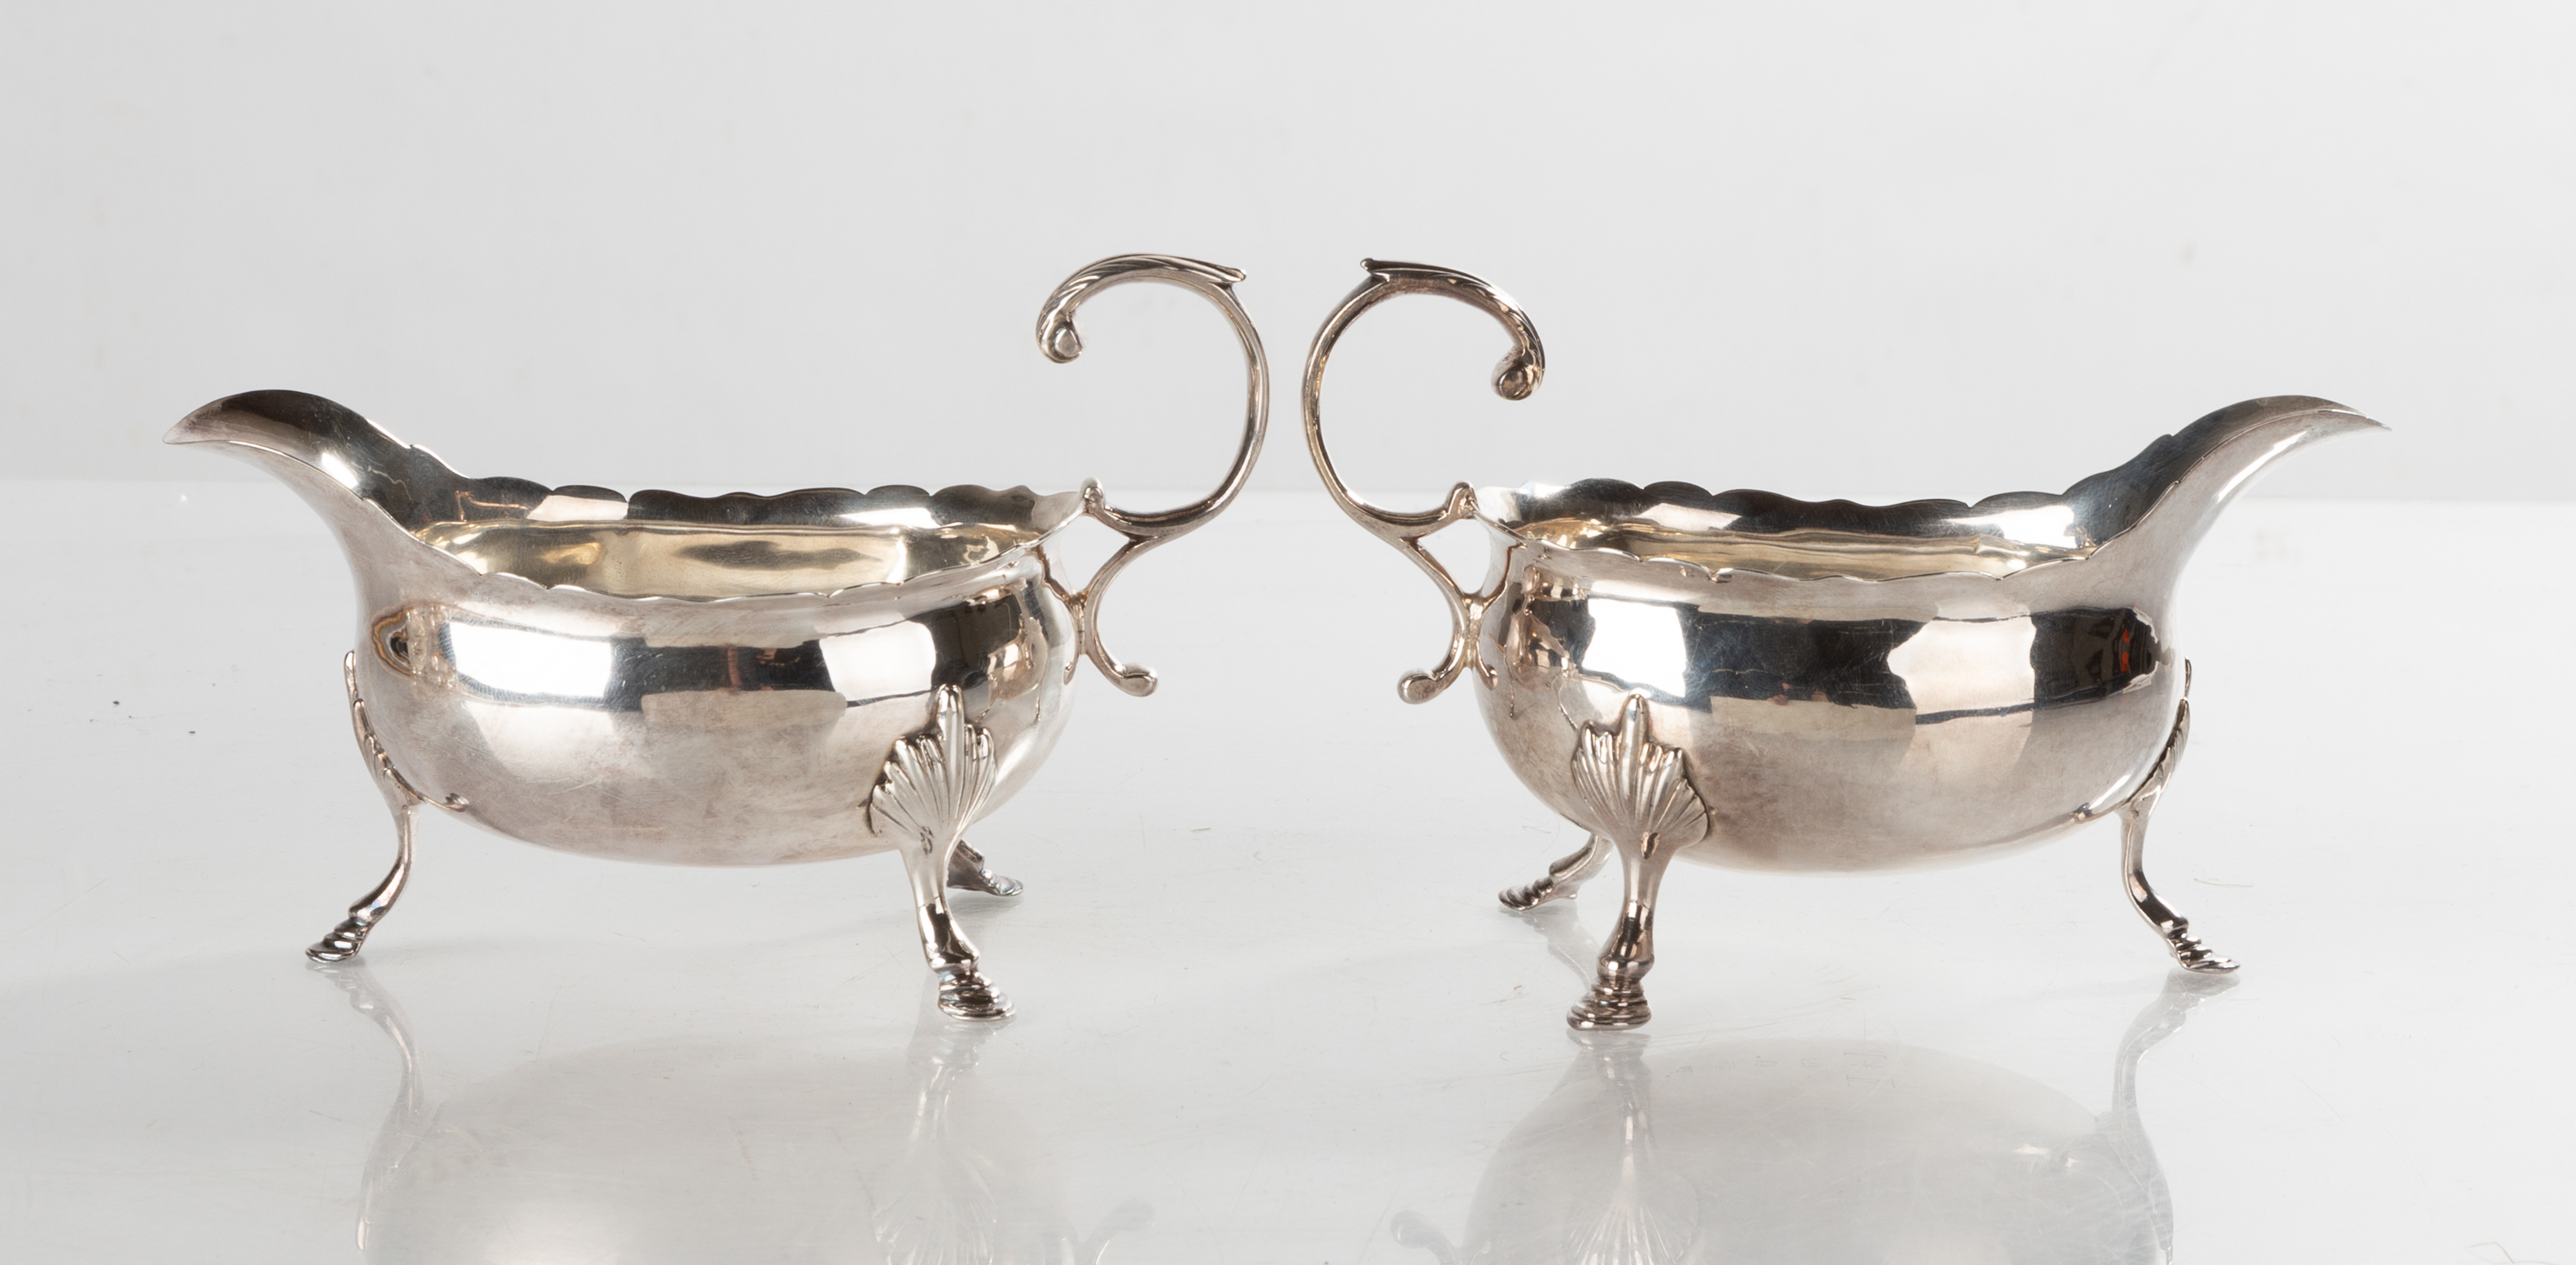 PAIR OF 18TH CENTURY ENGLISH STERLING 2faf77d